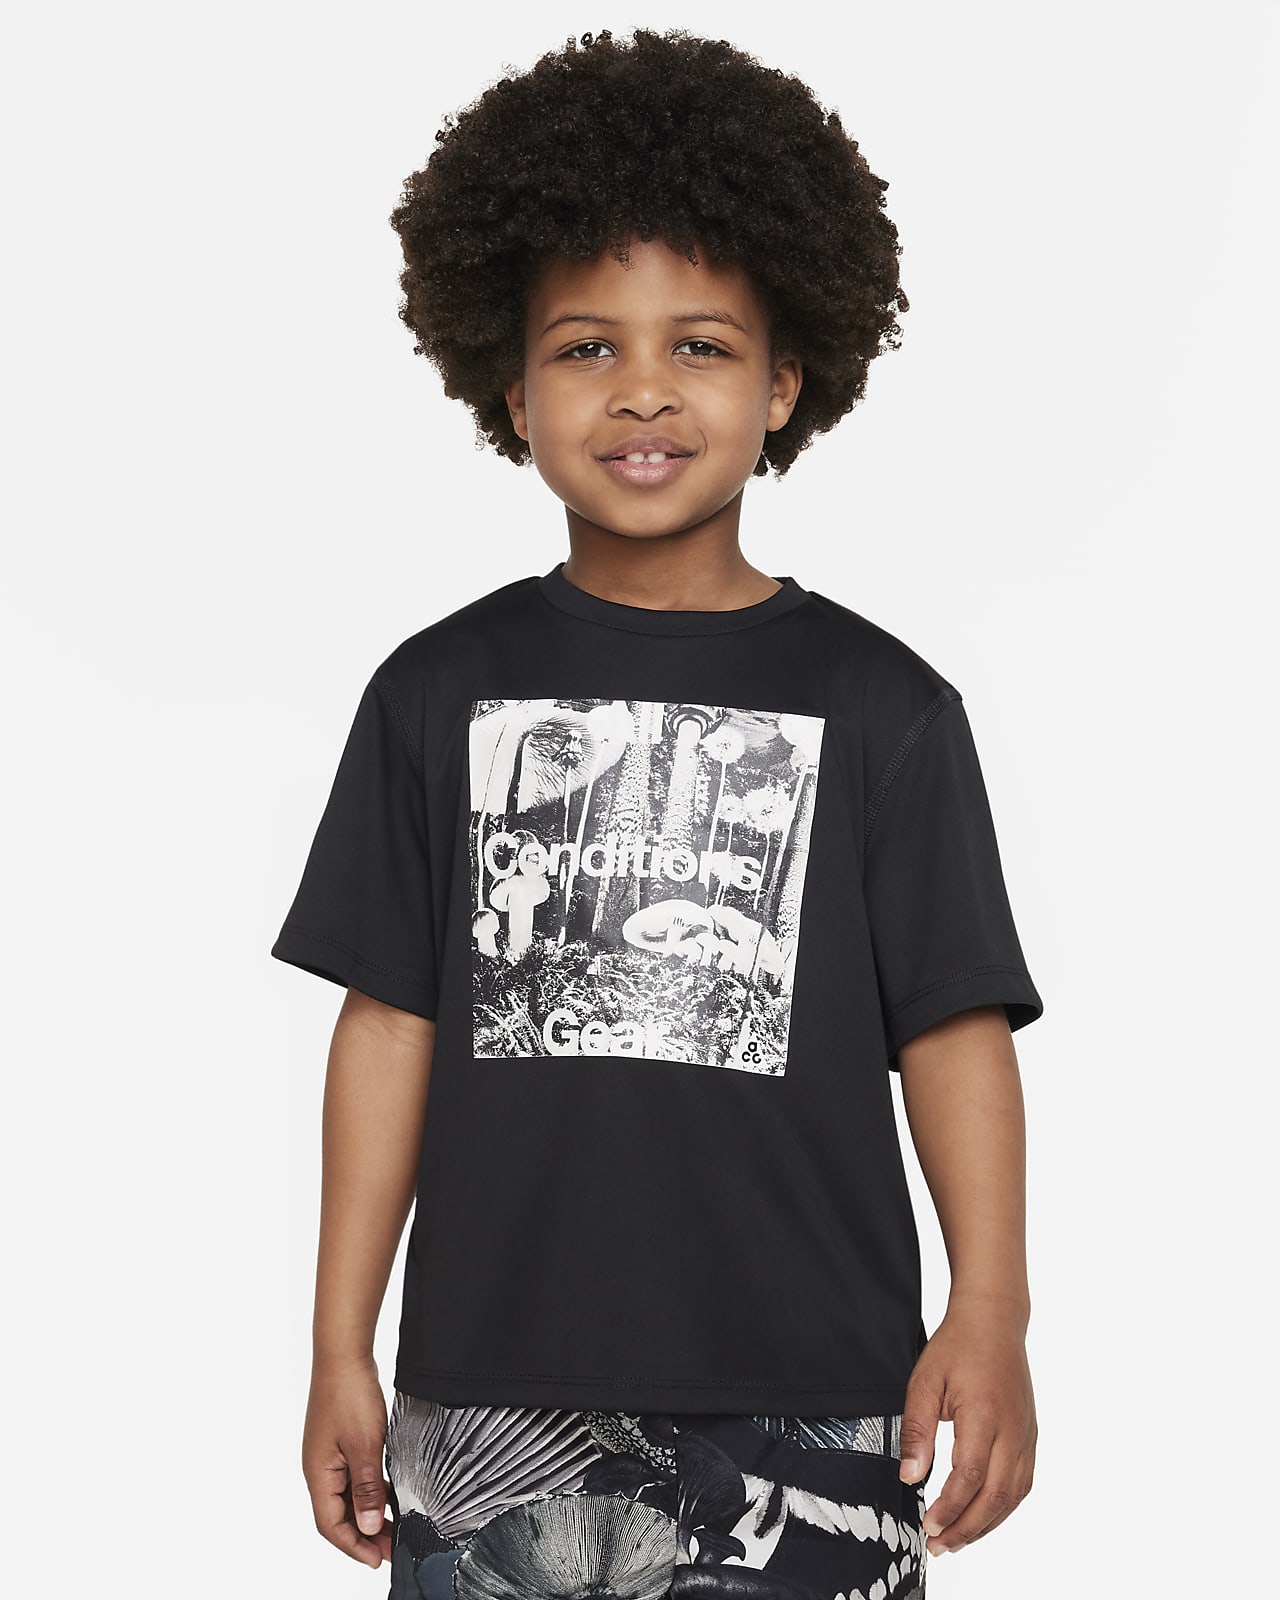 Nike ACG Graphic Performance Tee Younger Kids' Sustainable-Material UPF Dri-FIT Tee